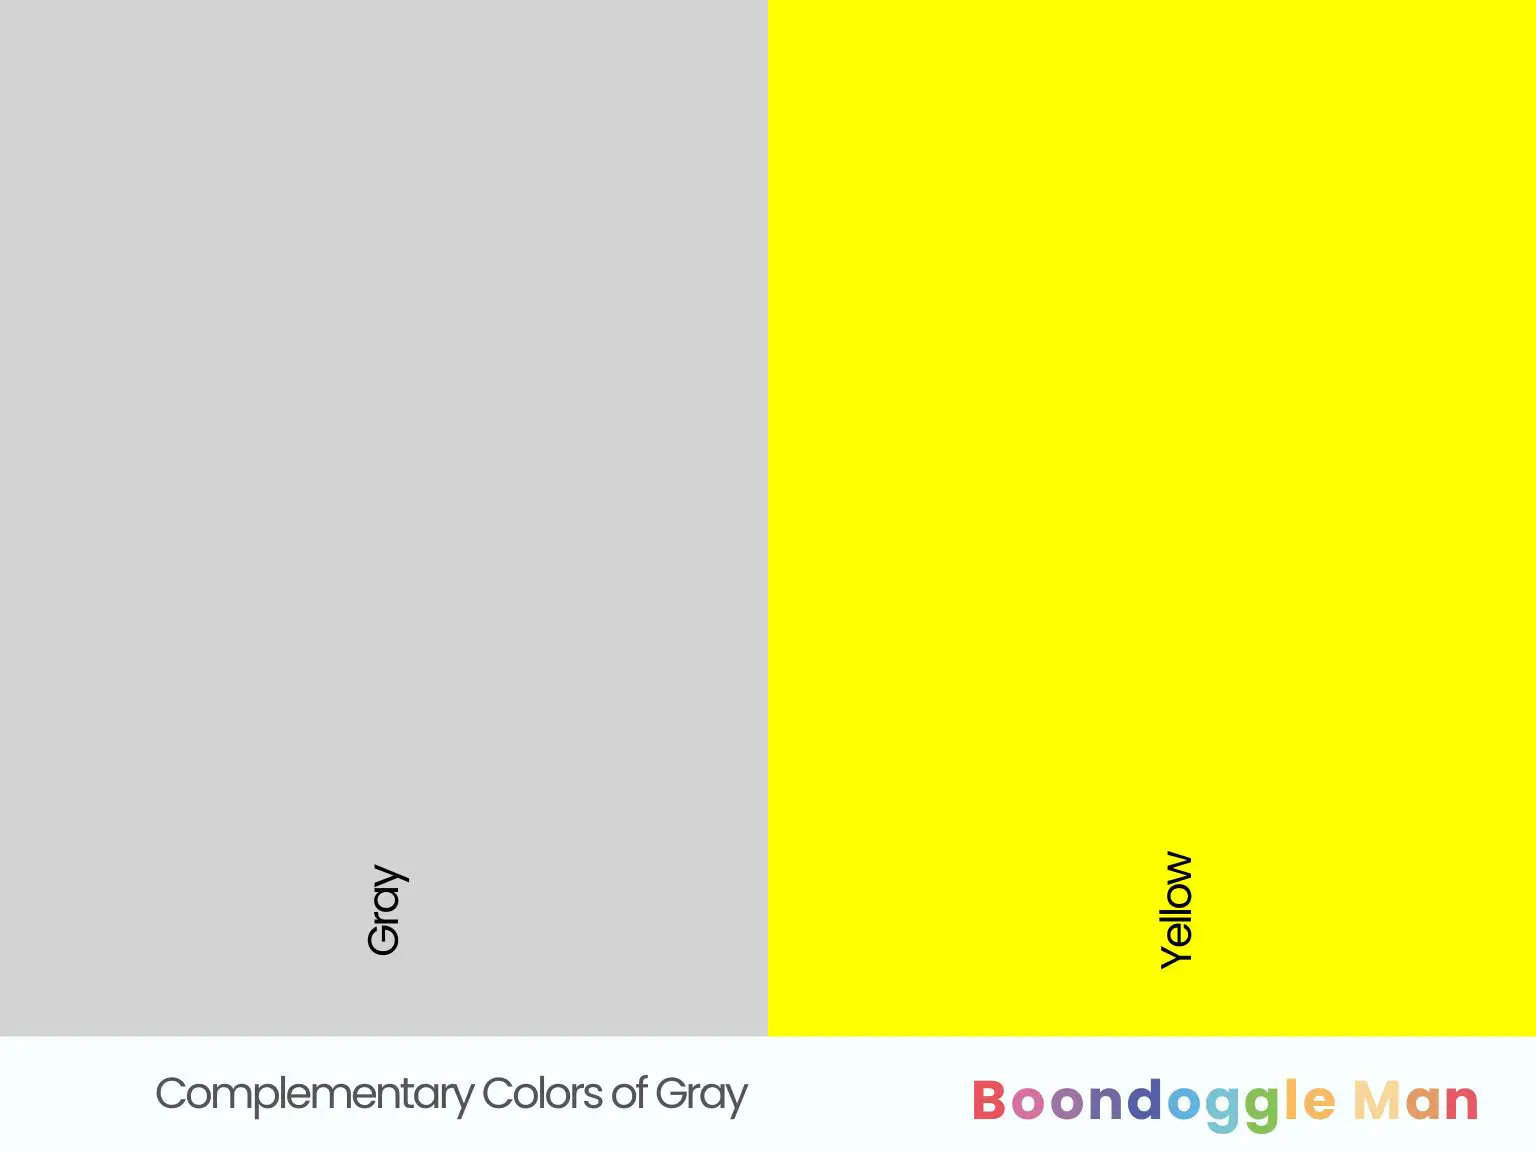 Complementary Colors of Gray